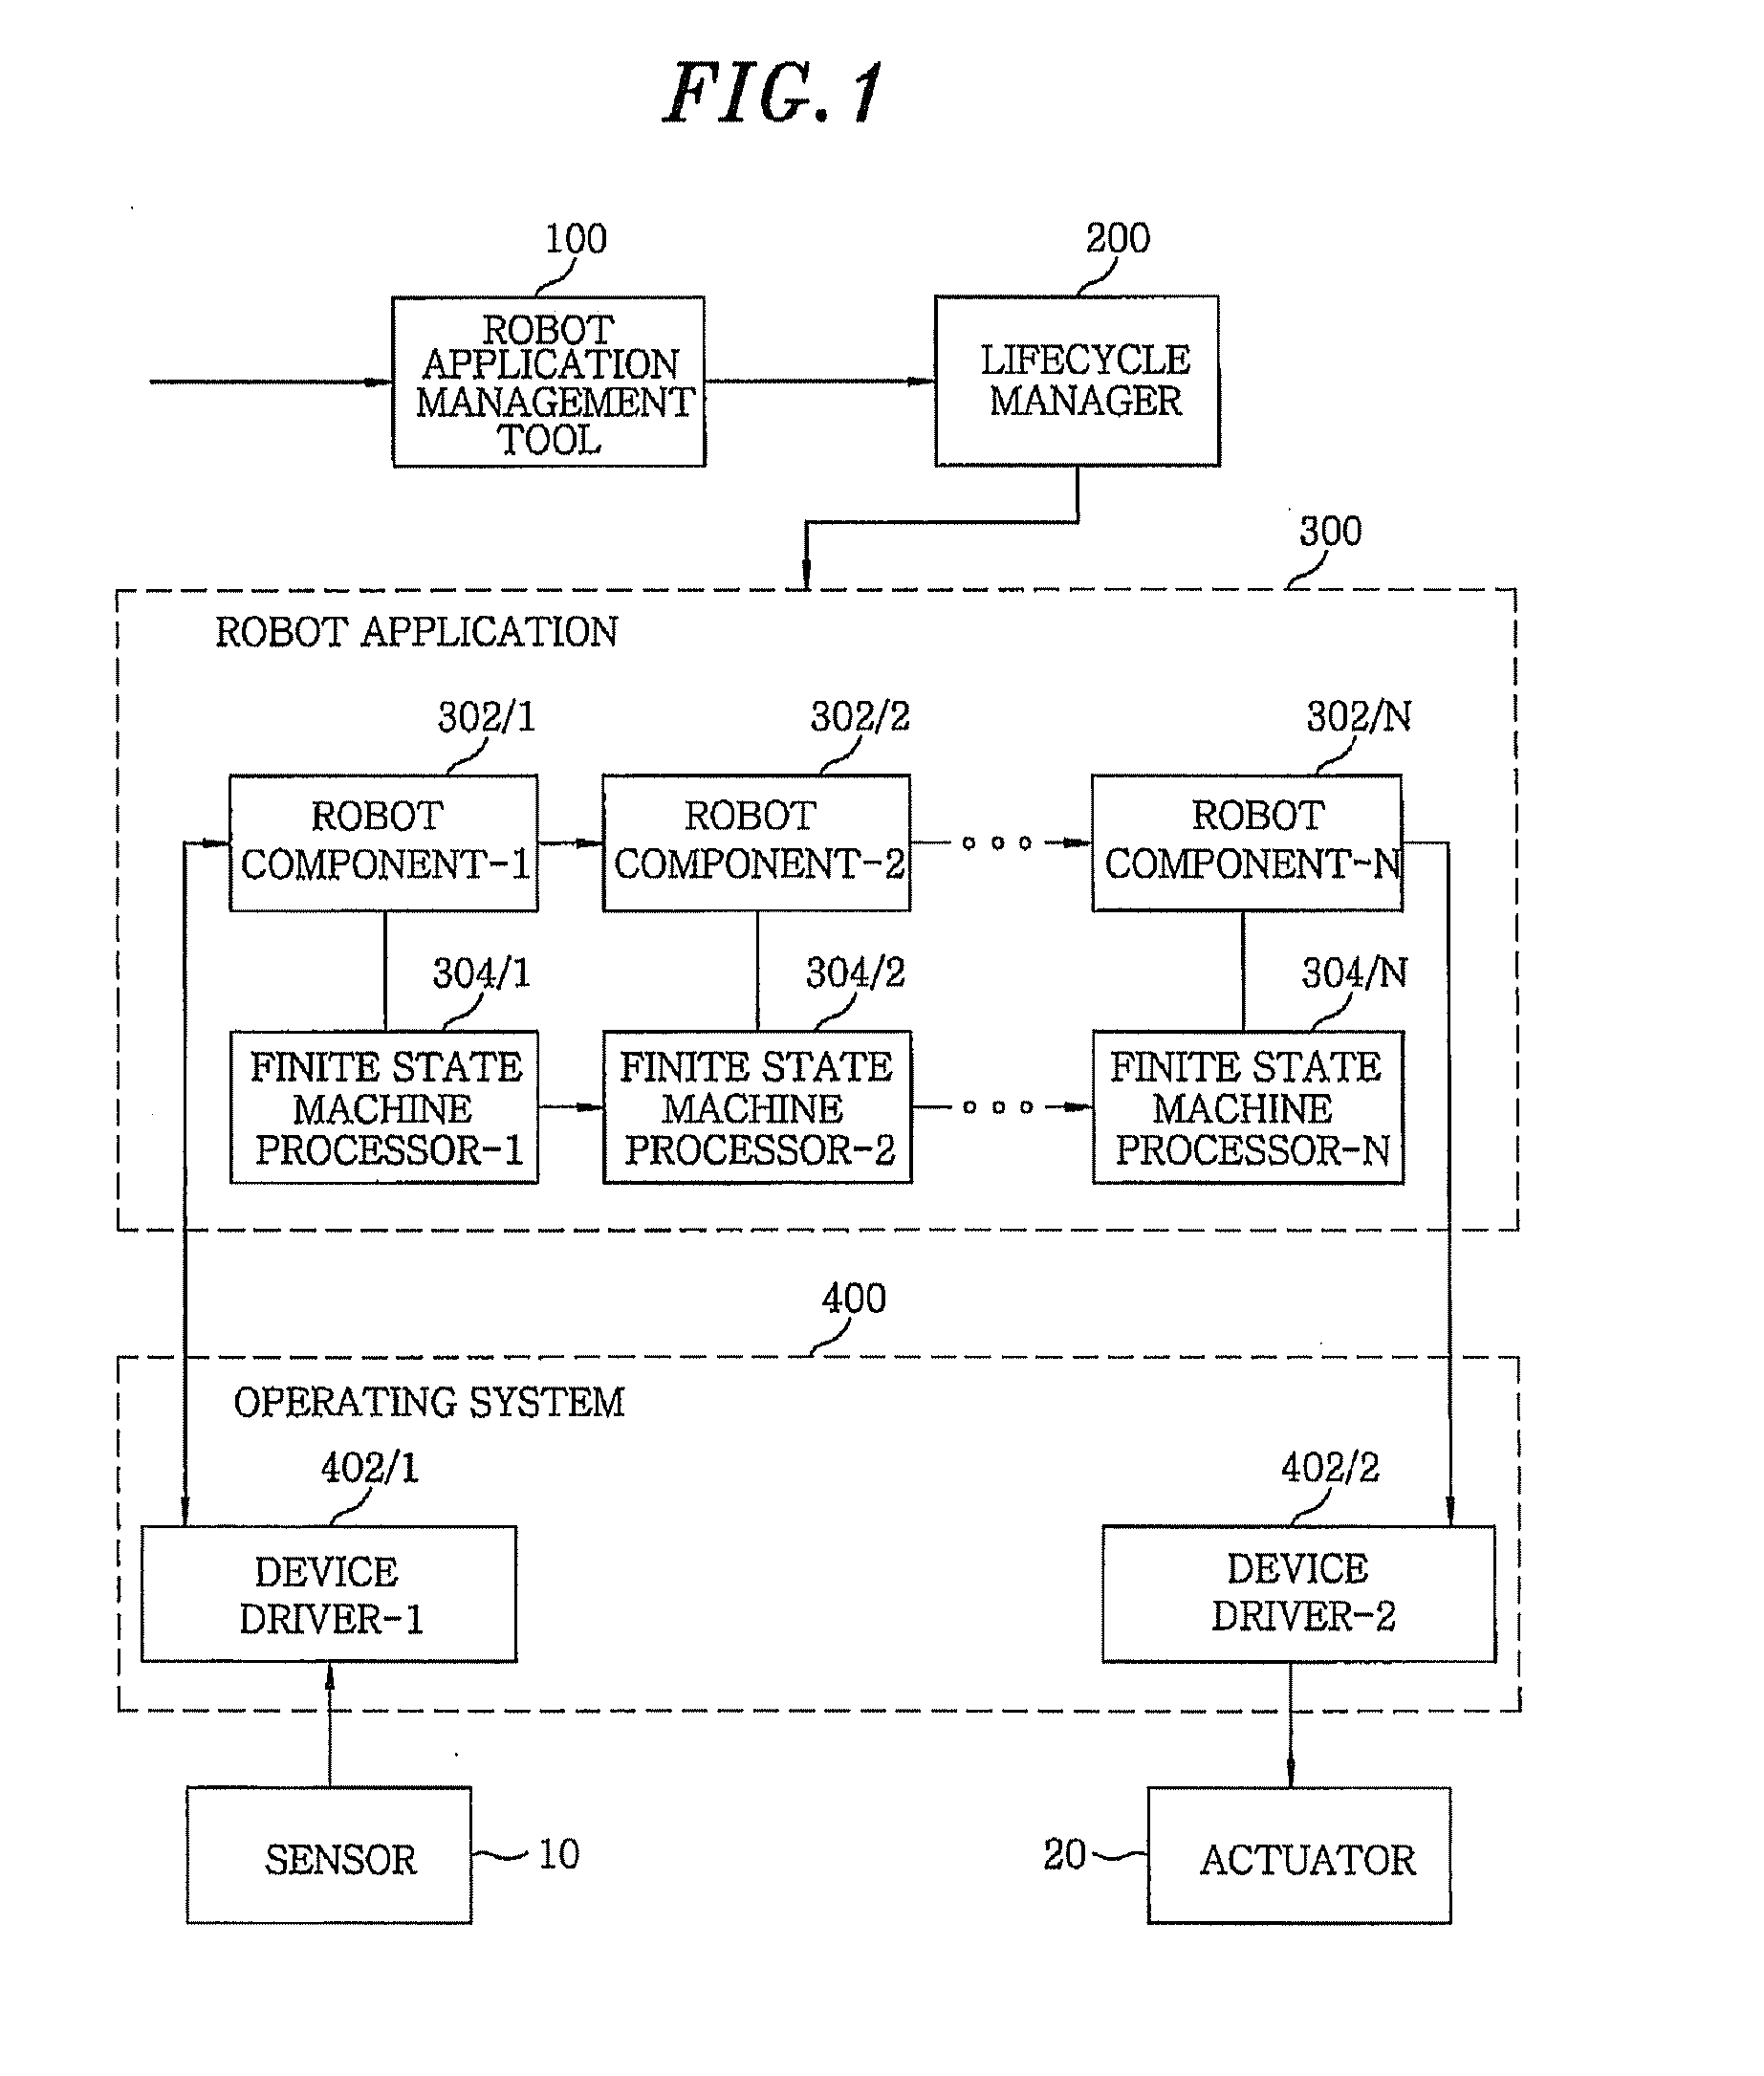 Method and apparatus for managing robot components